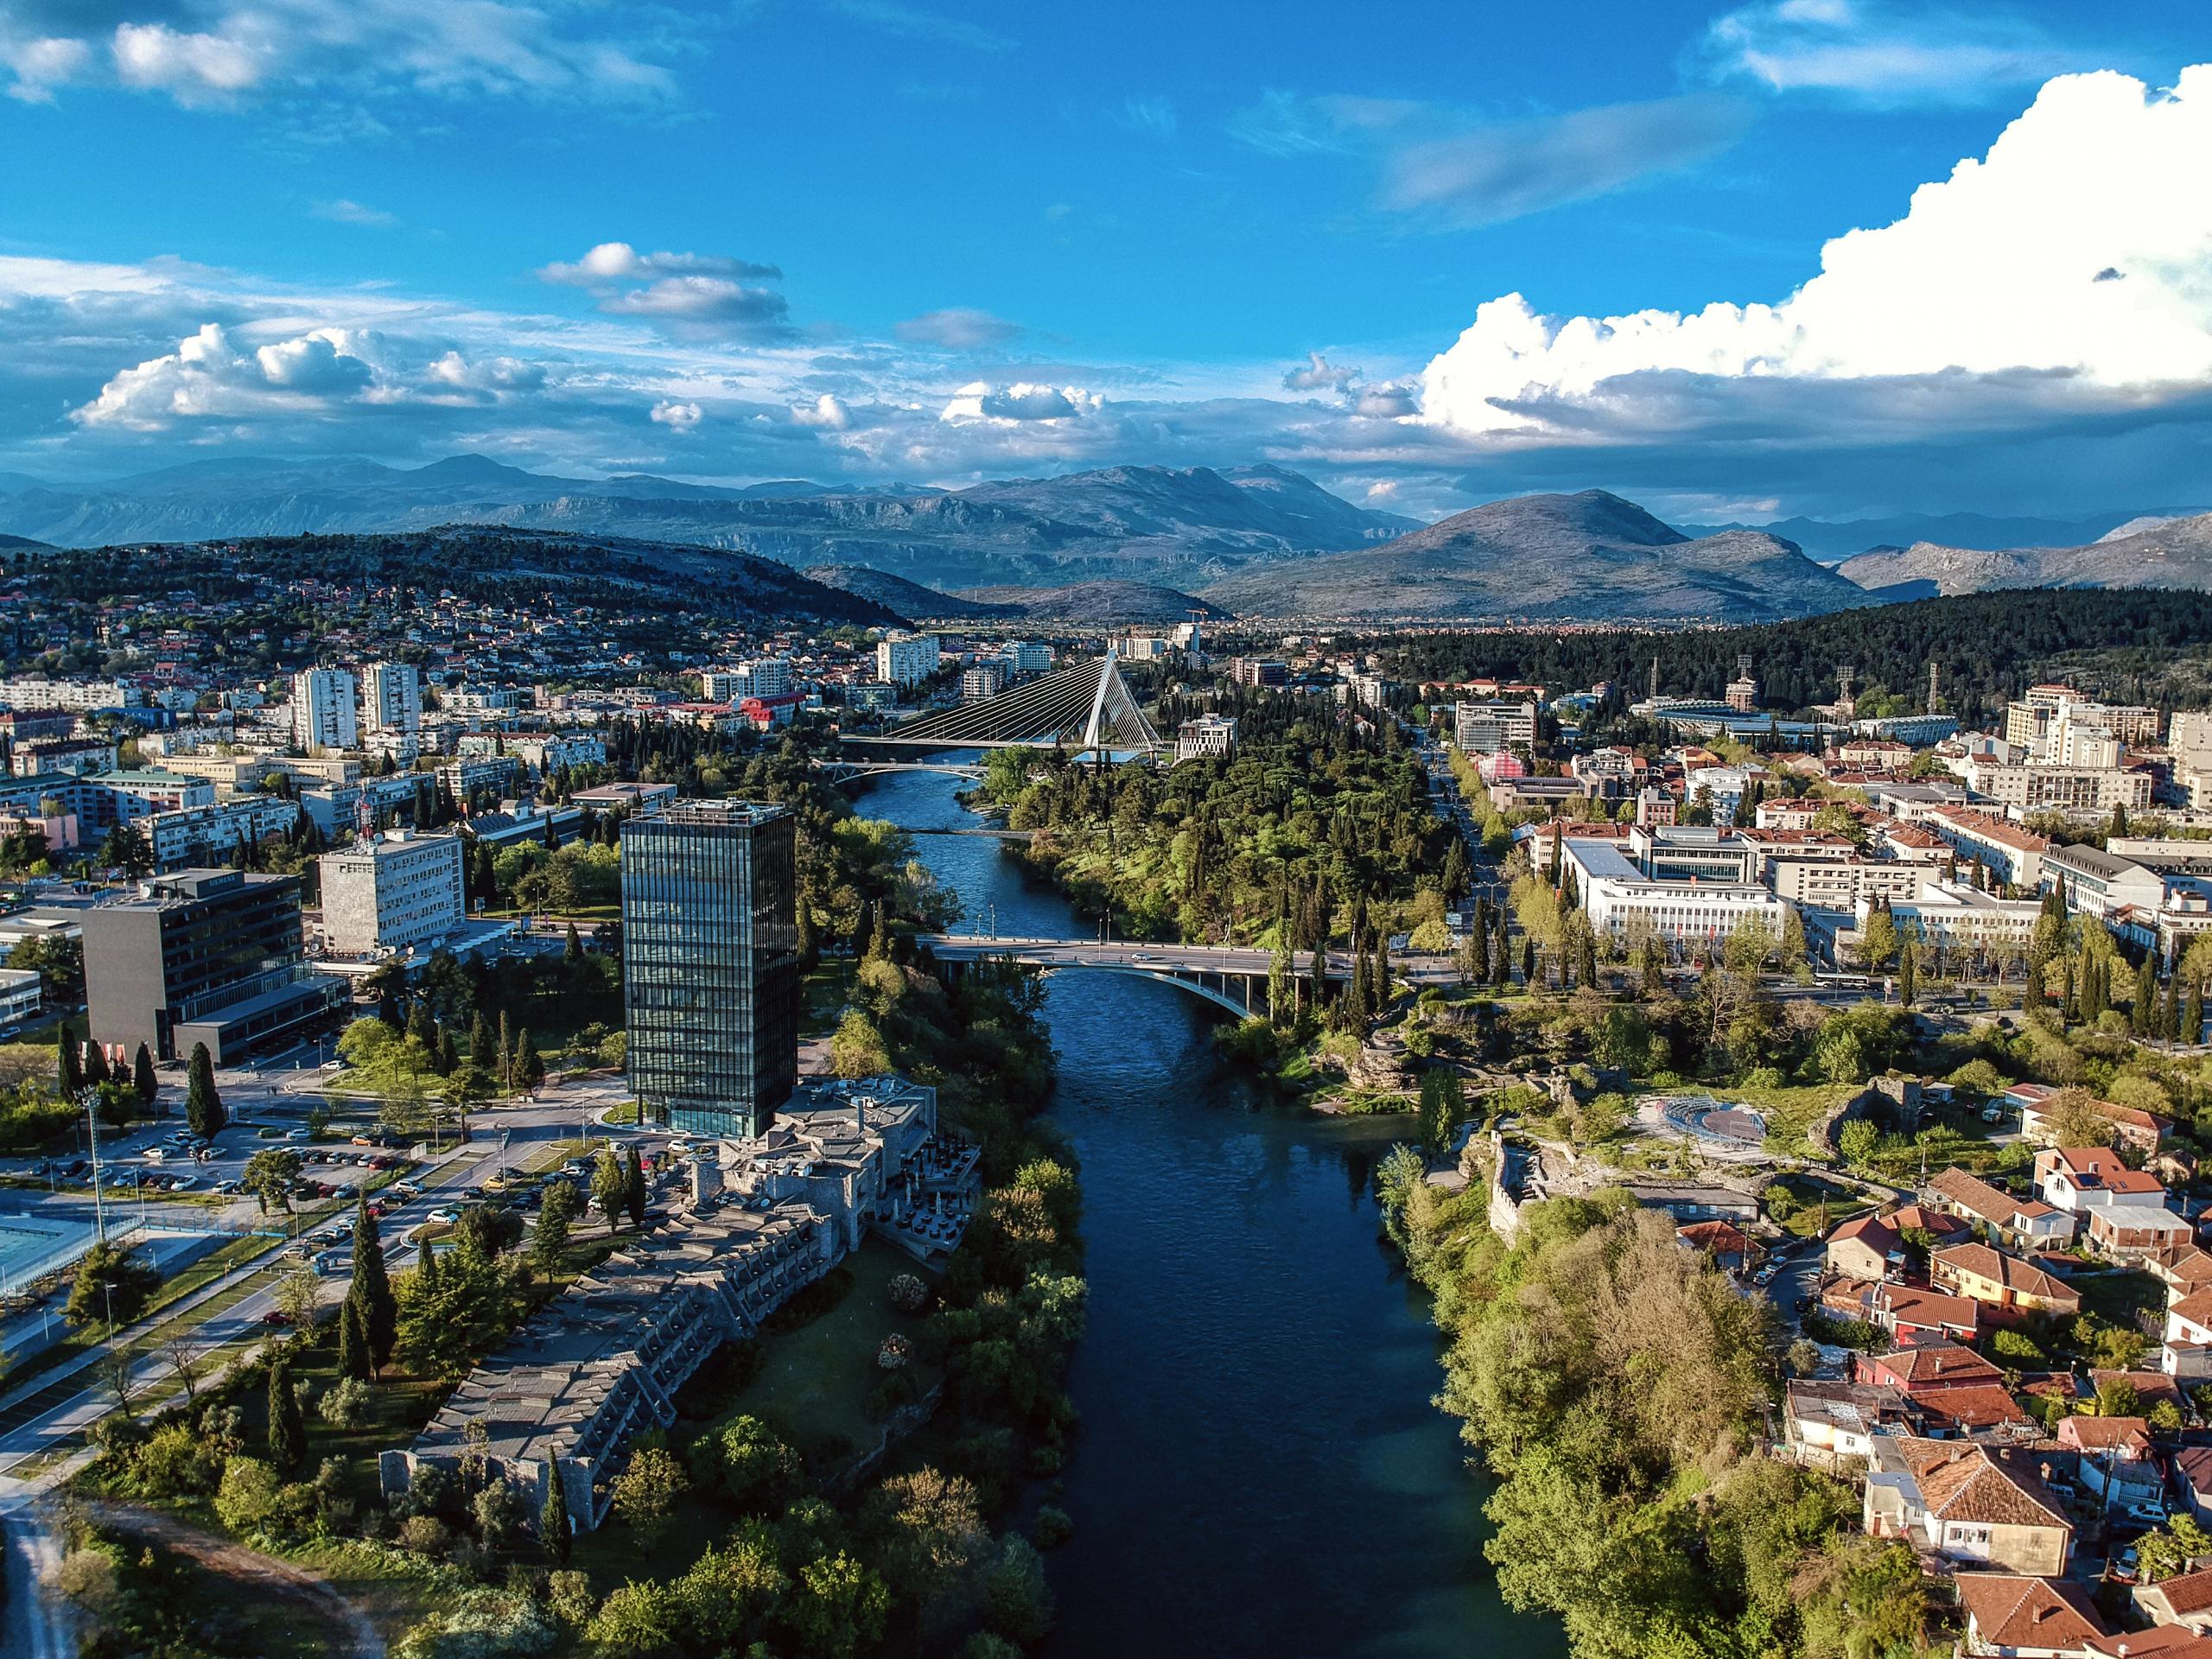 Podgorica, a city on the palm of your hand